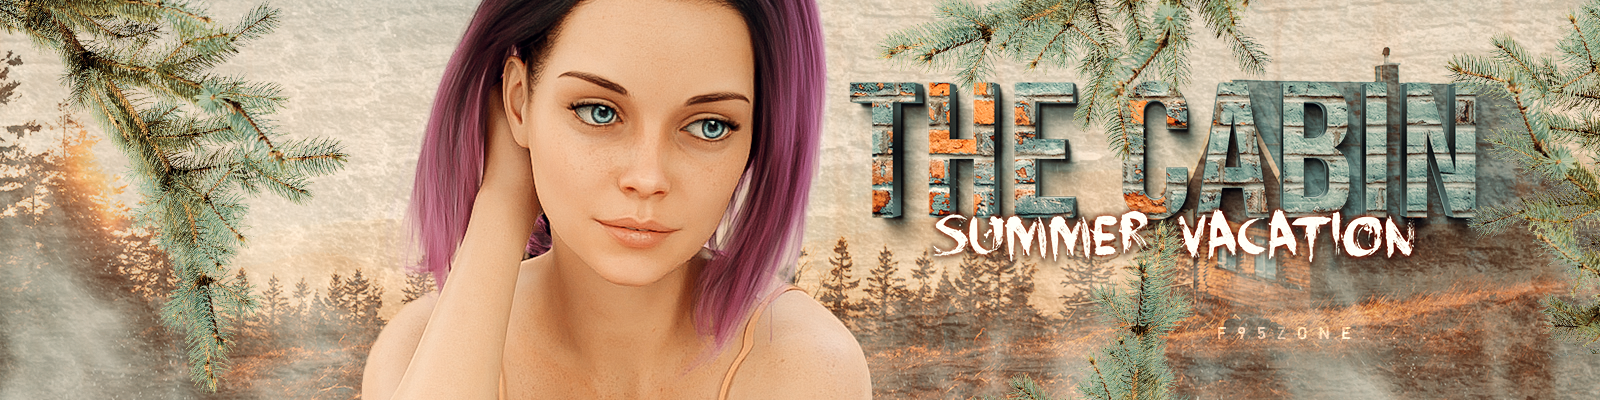 The Cabin – Summer Vacation | Episode 5